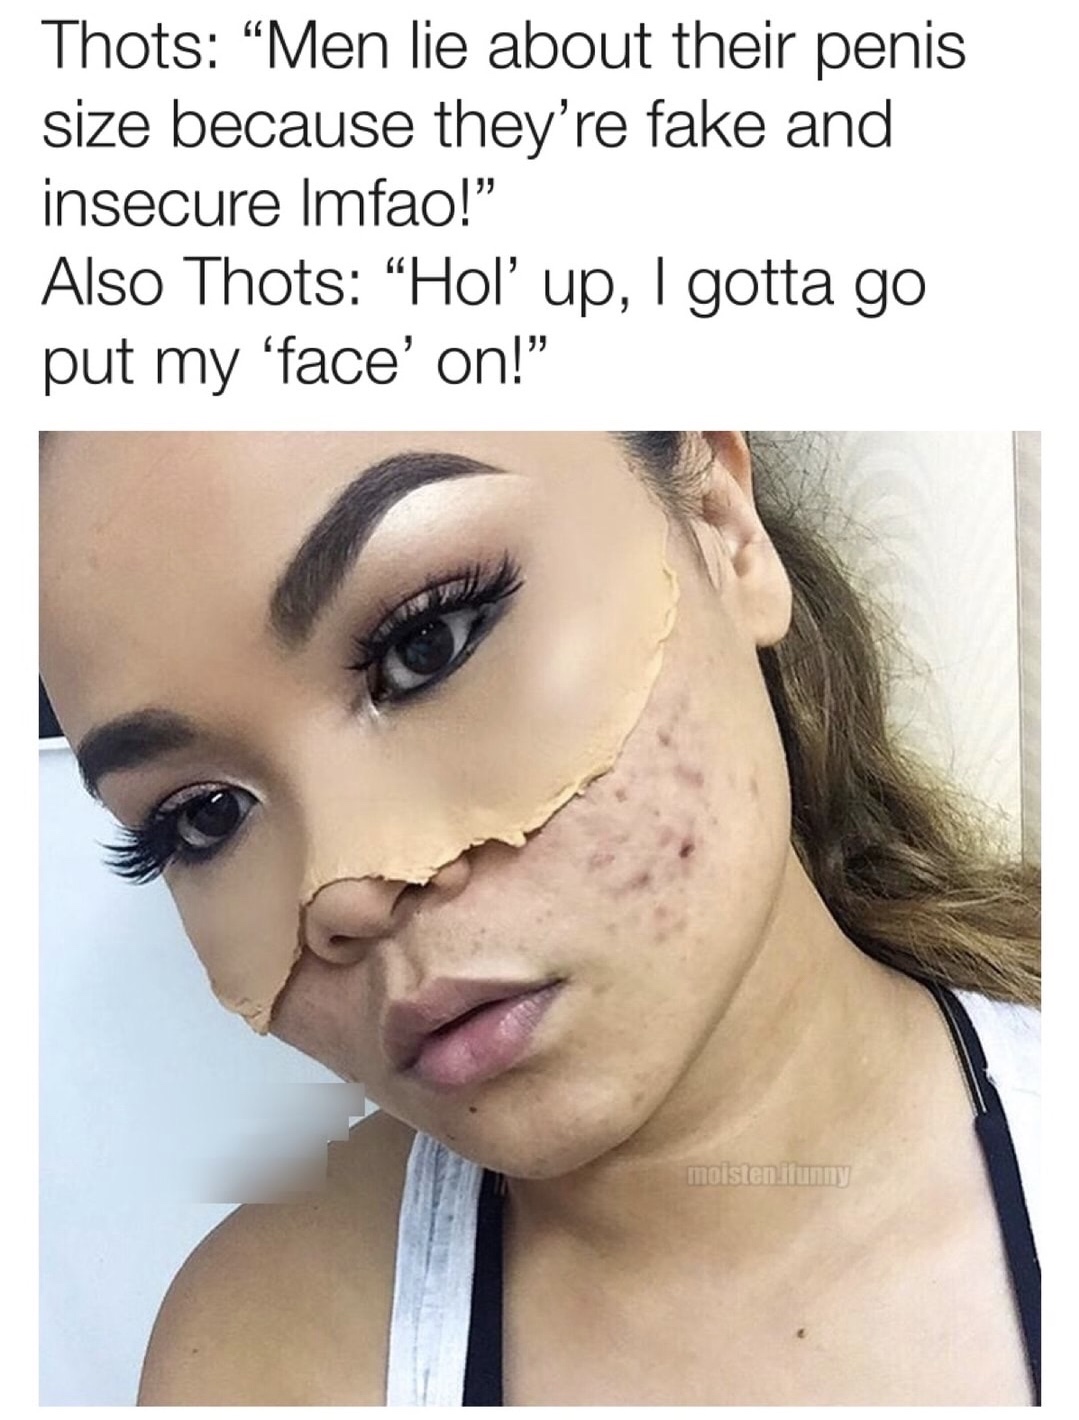 asian taking off makeup - Thots Men lie about their penis size because they're fake and insecure Imfao! Also Thots "Hol up, I gotta go put my 'face' on!" moisten. funny